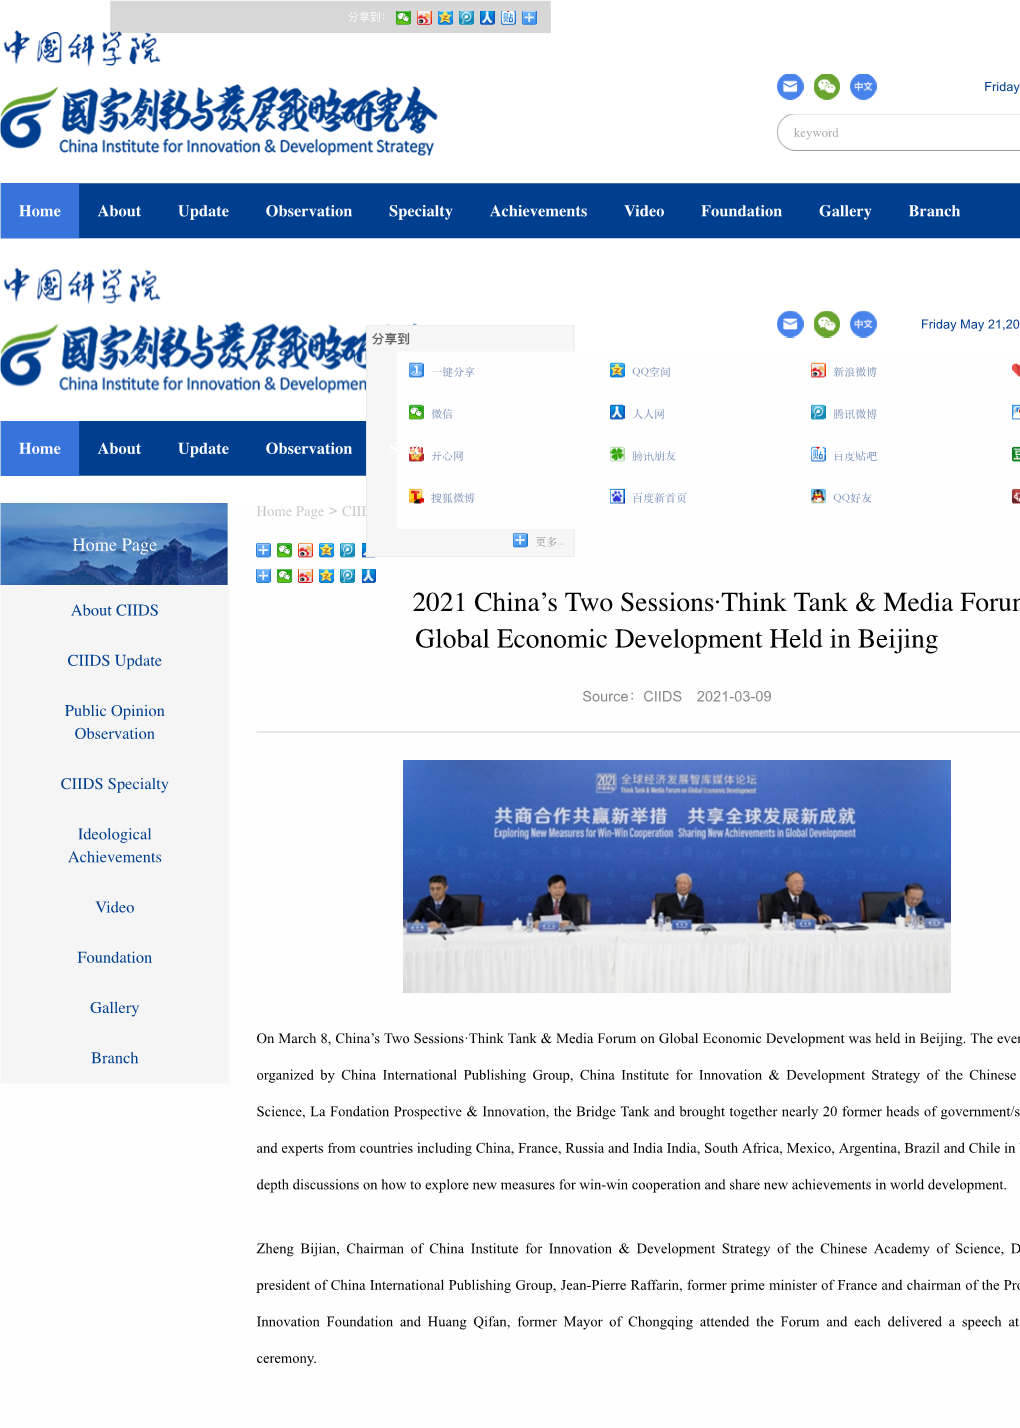 China Institute for Innovation and Development Strategy